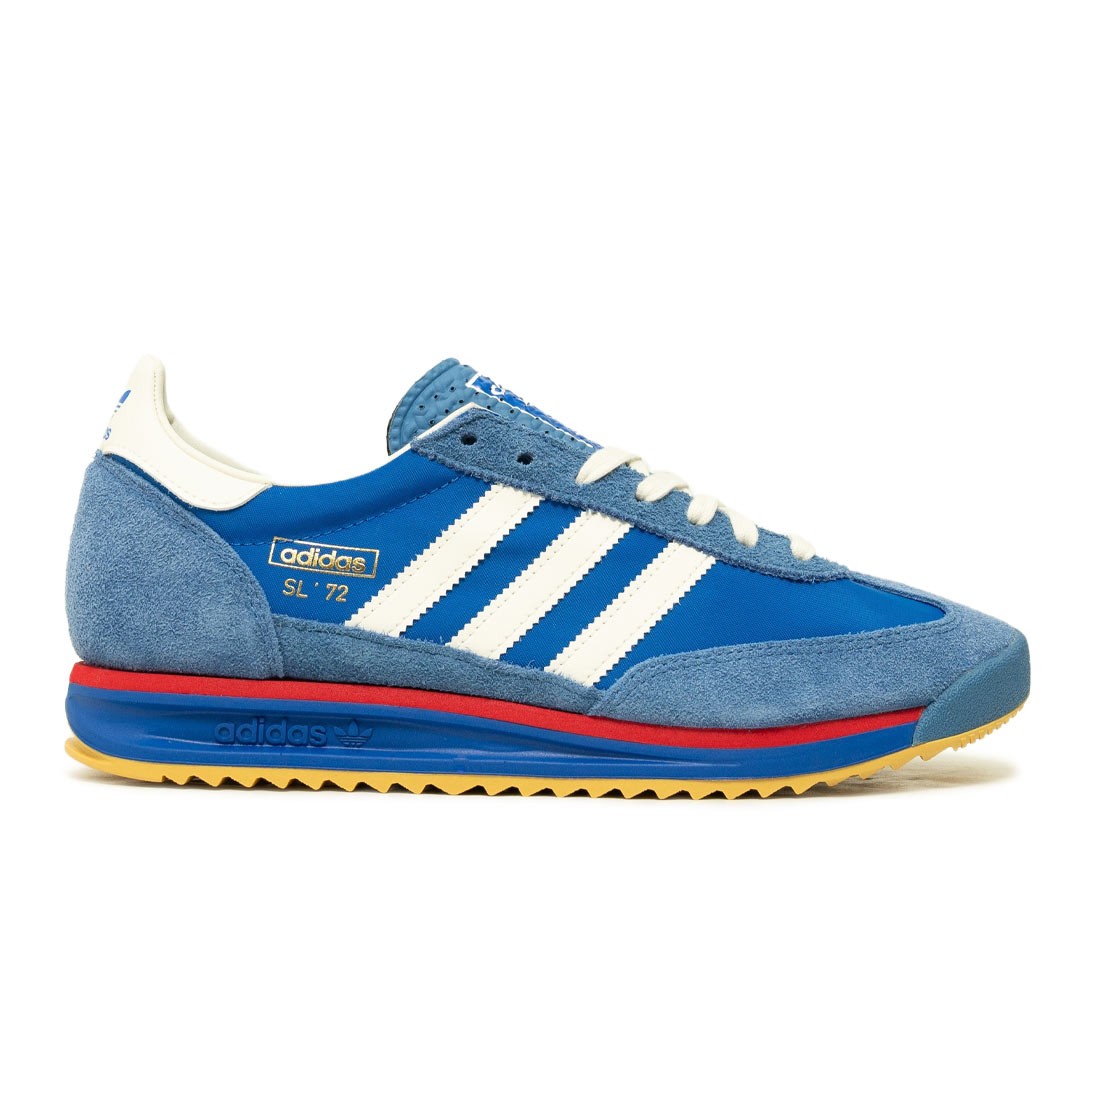 The ESPN x date adidas Top Ten High SportsCenter celebrates the 1979 debut of both